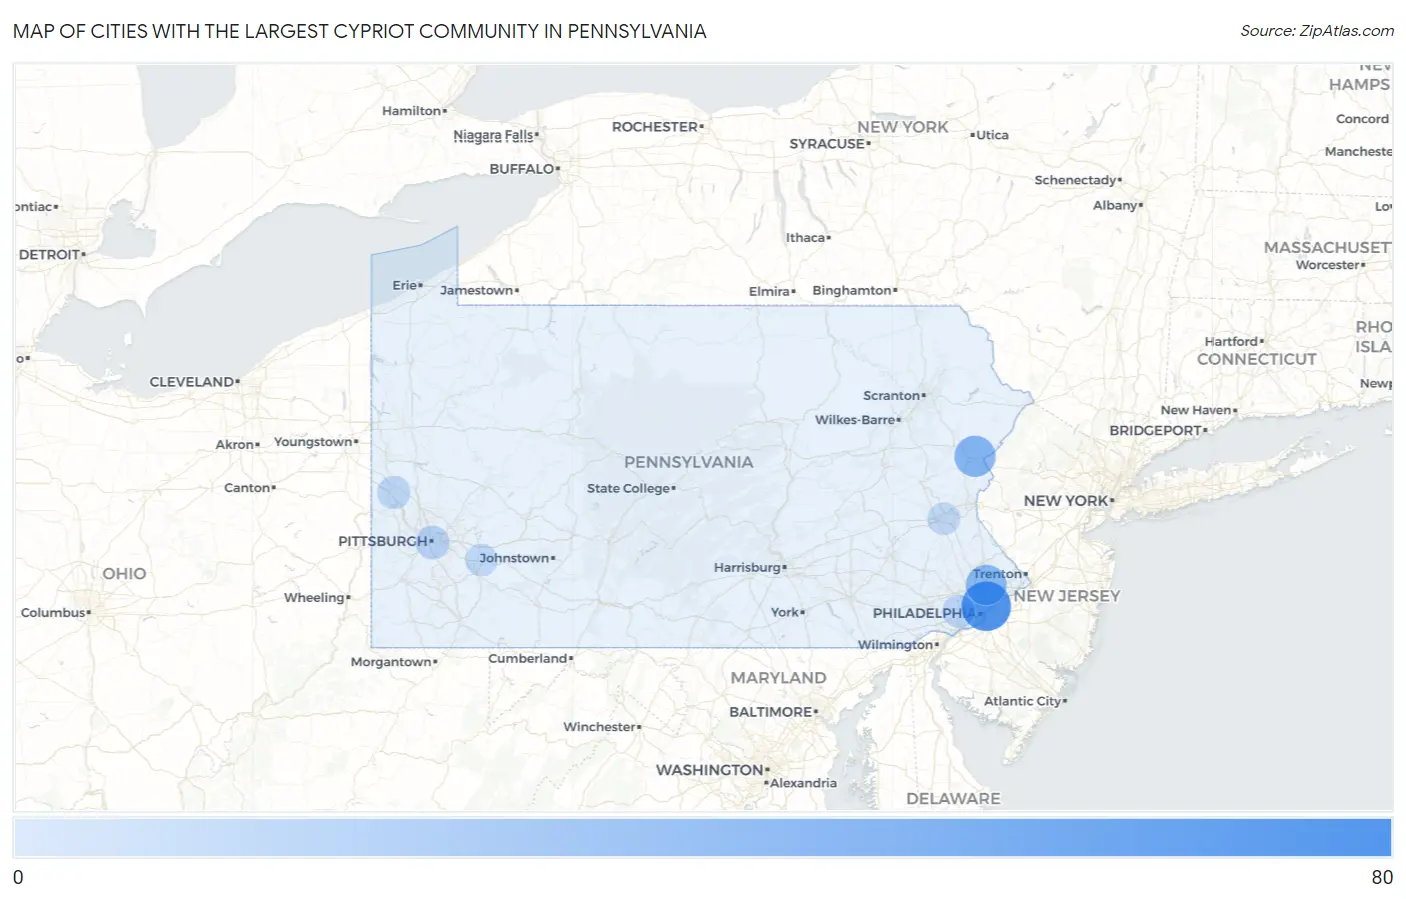 Cities with the Largest Cypriot Community in Pennsylvania Map